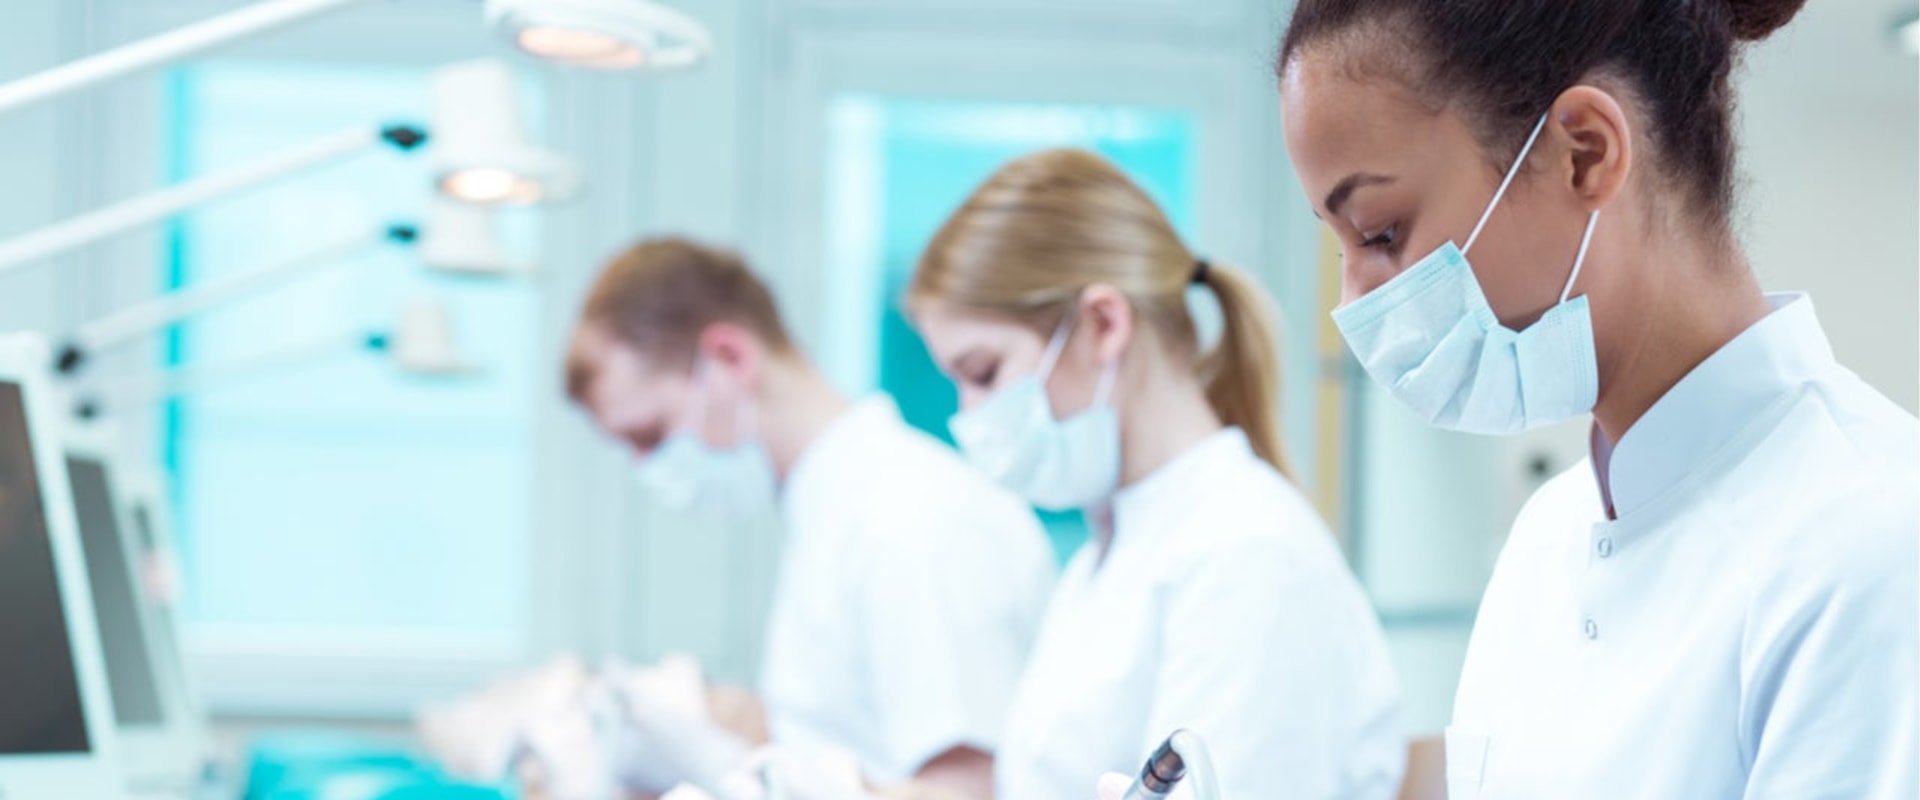 Is becoming an endodontist worth it?